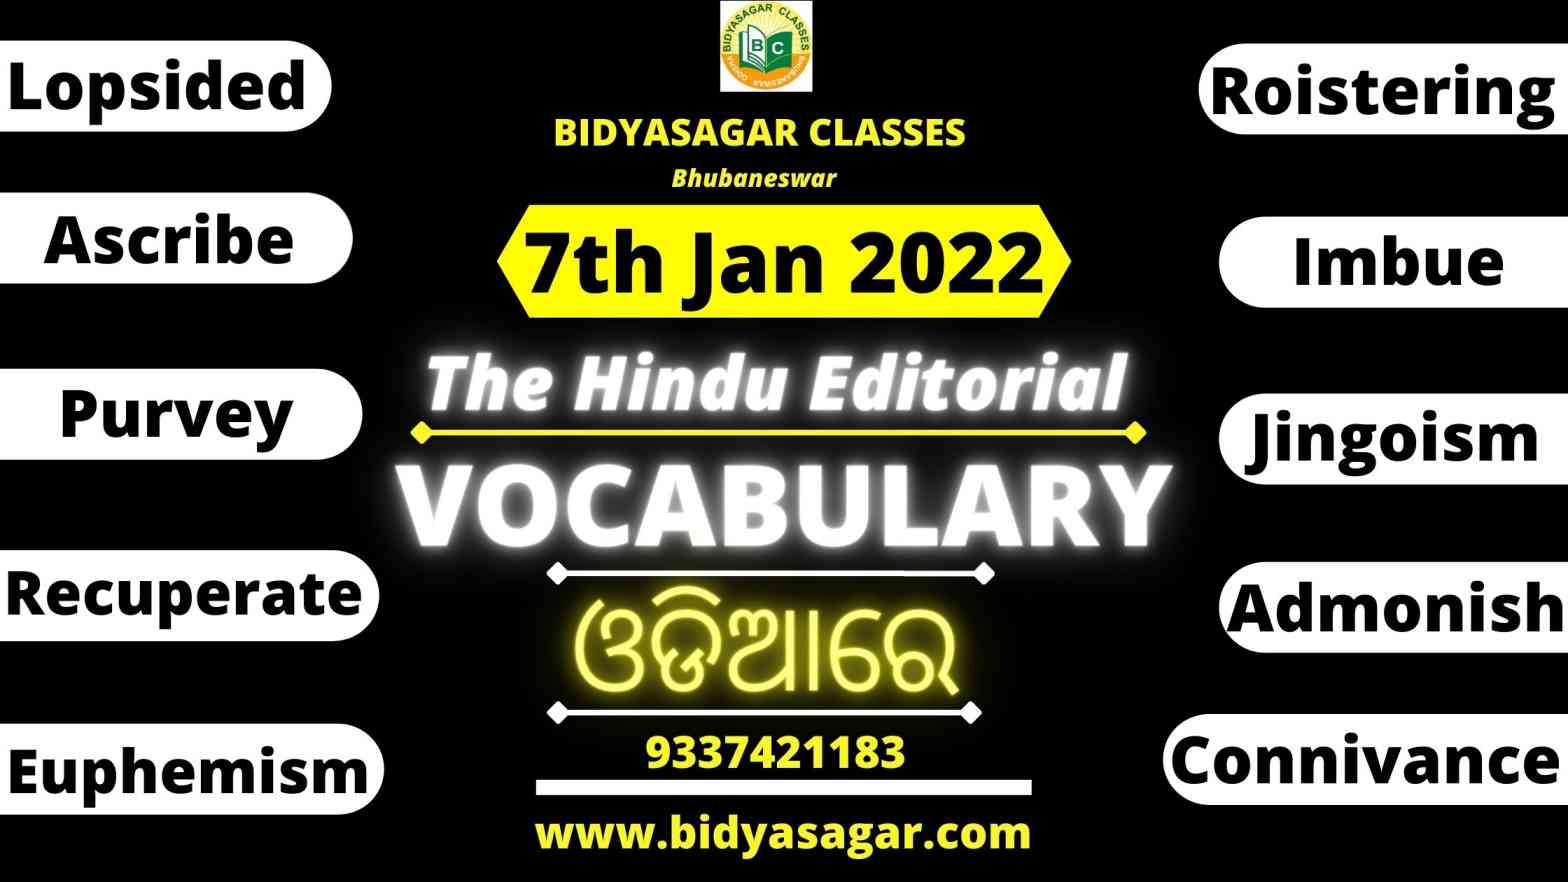 The Hindu Editorial Vocabulary of 7th January 2022